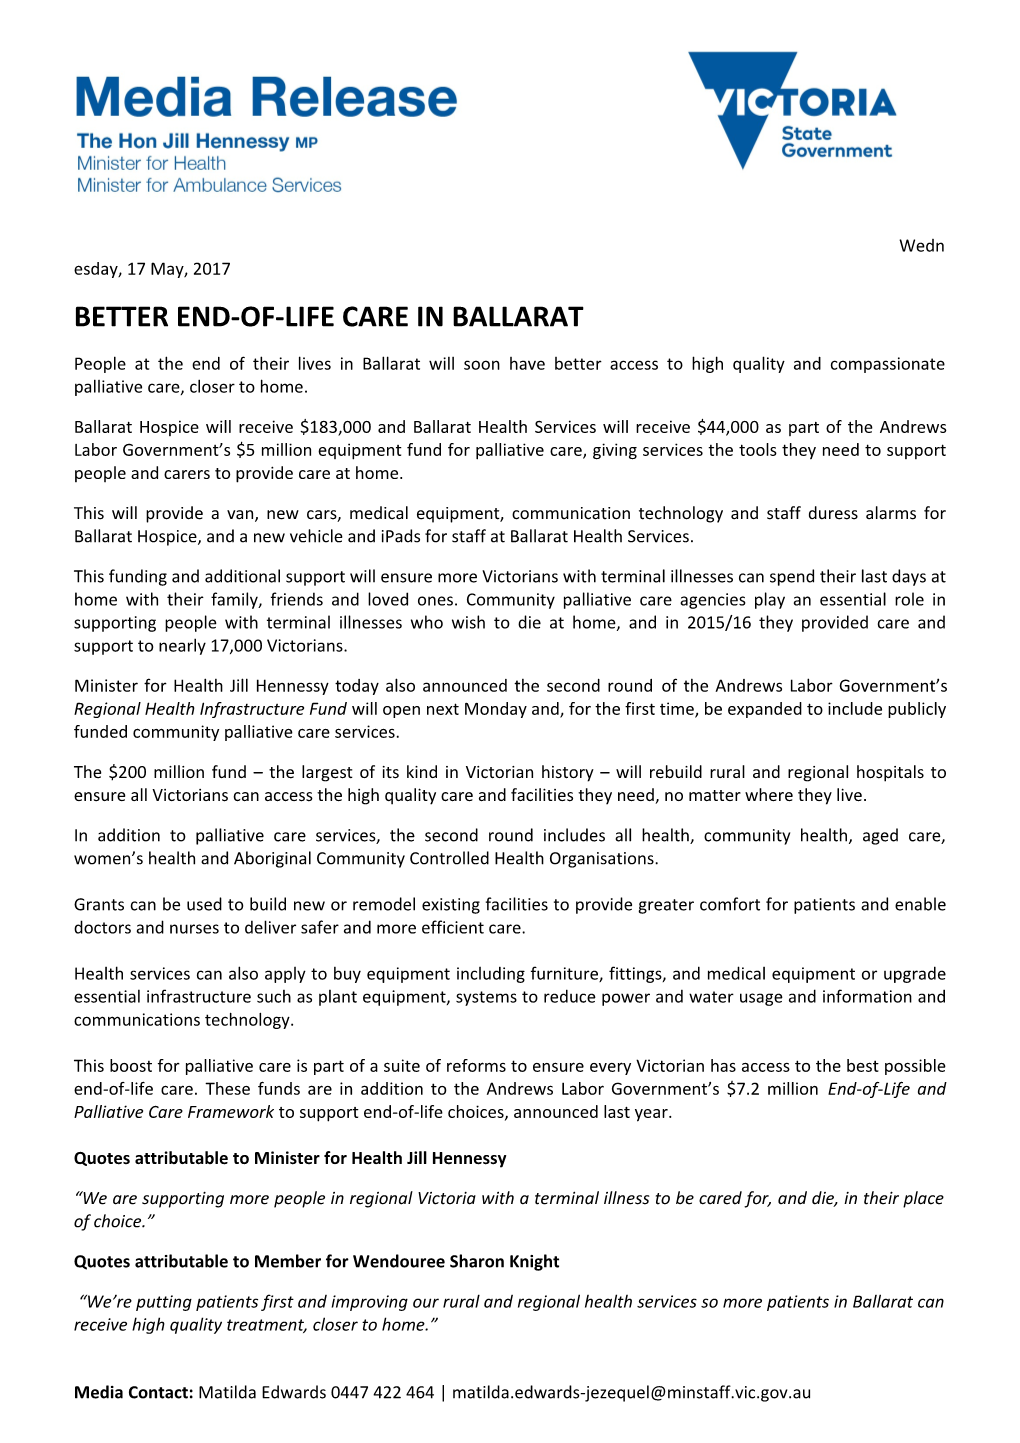 Better End-Of-Life Care in Ballarat